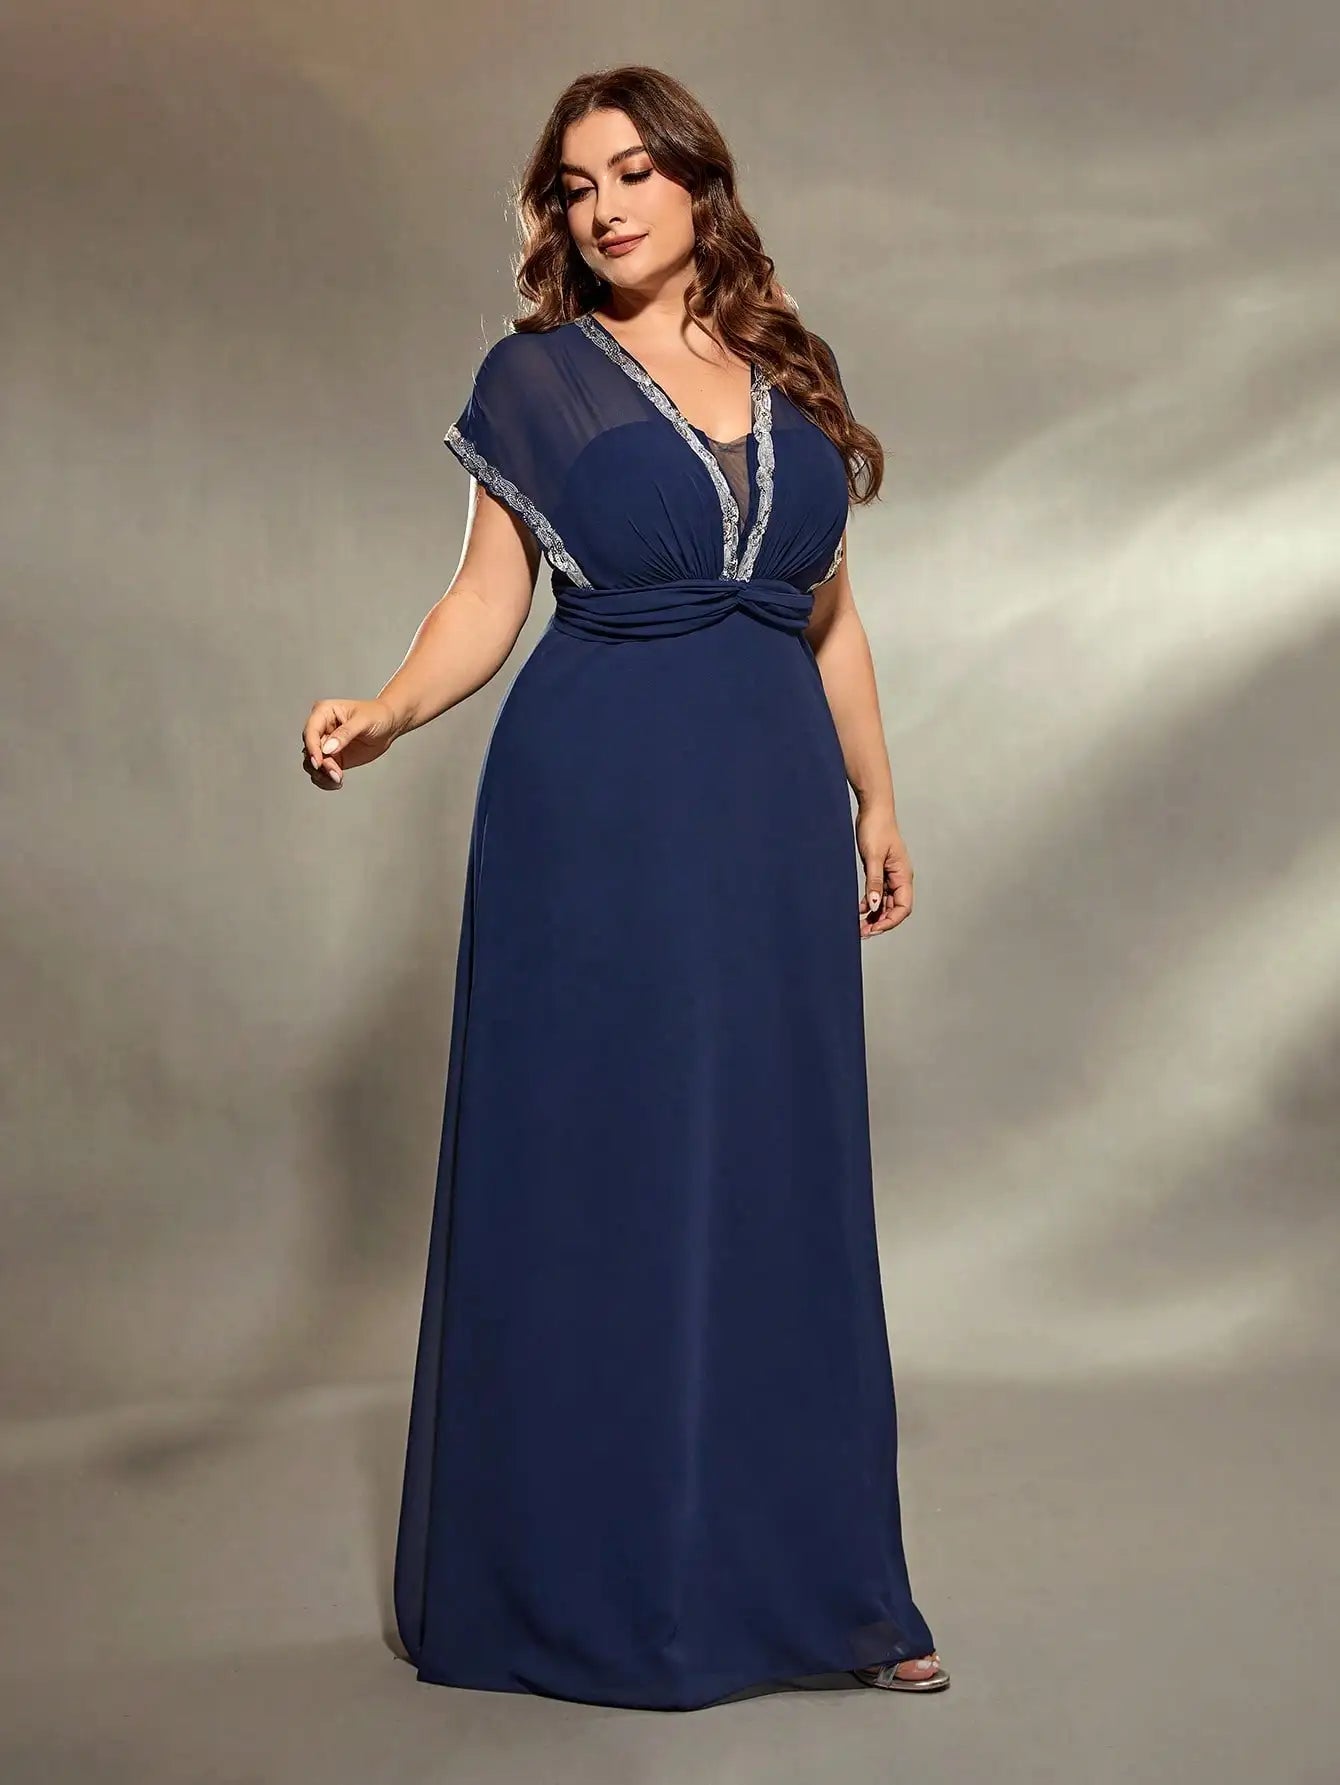 Mgiacy plus size V-neck Silver sequin Lace Bat-sleeve waist kink A swing long dress Evening gown Ball dress Party dress